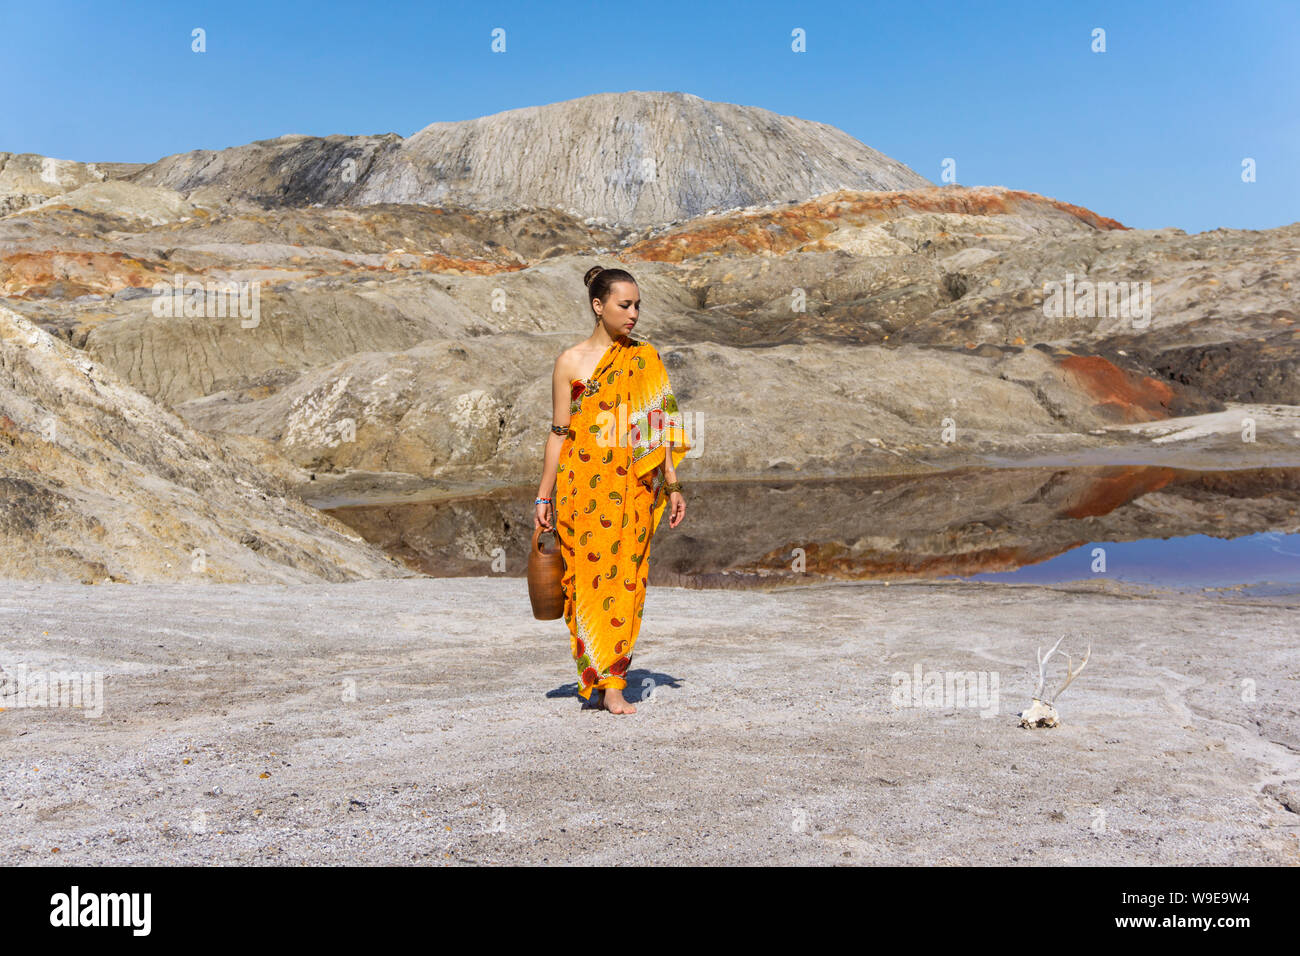 young woman in a sari with a jug comes from a pond in an arid, lifeless area, looking thoughtfully at the skull of an animal Stock Photo